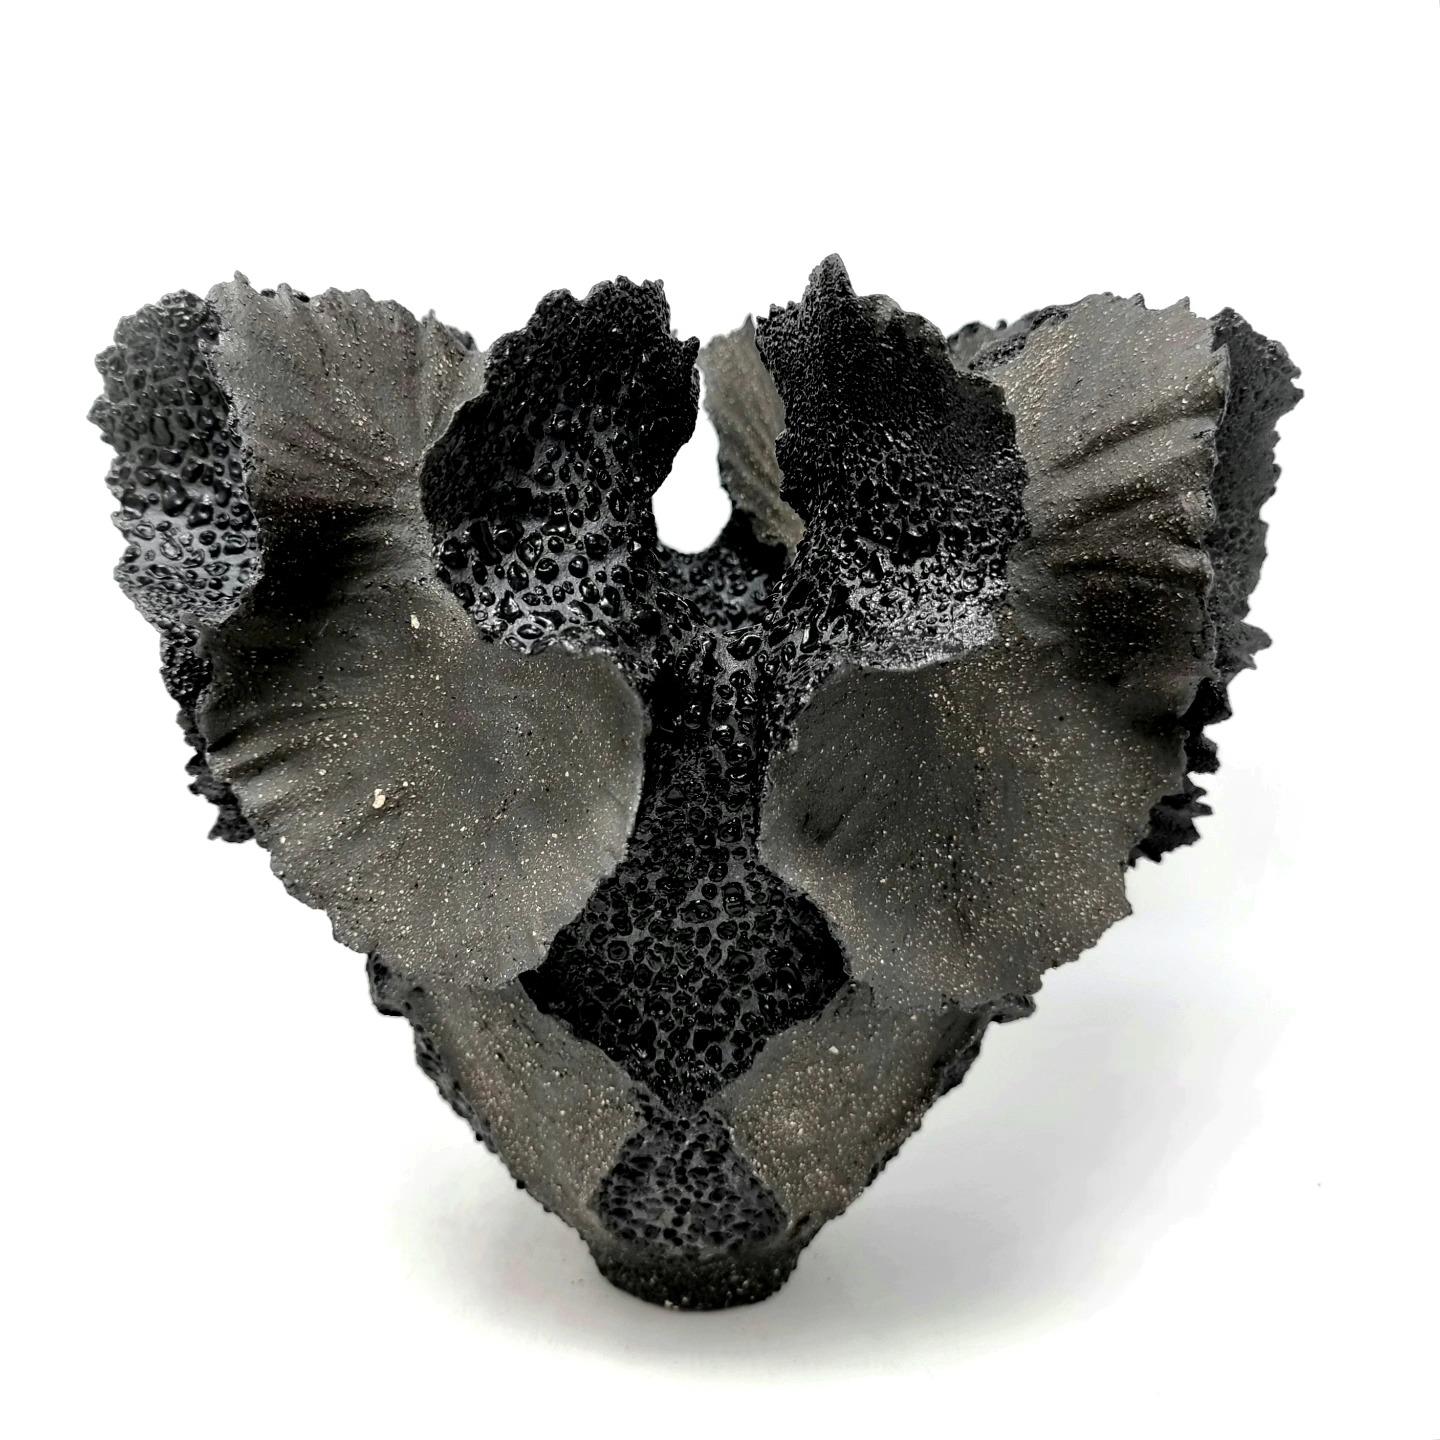 Handbuilt Stonewear Sculpture in black stonewear clay

It is sculpted by hand, slowly adding coils and clay to create the final result. This is a piece of art based on classic sculpting methods. 
 
On the inside the piece is glazed with black